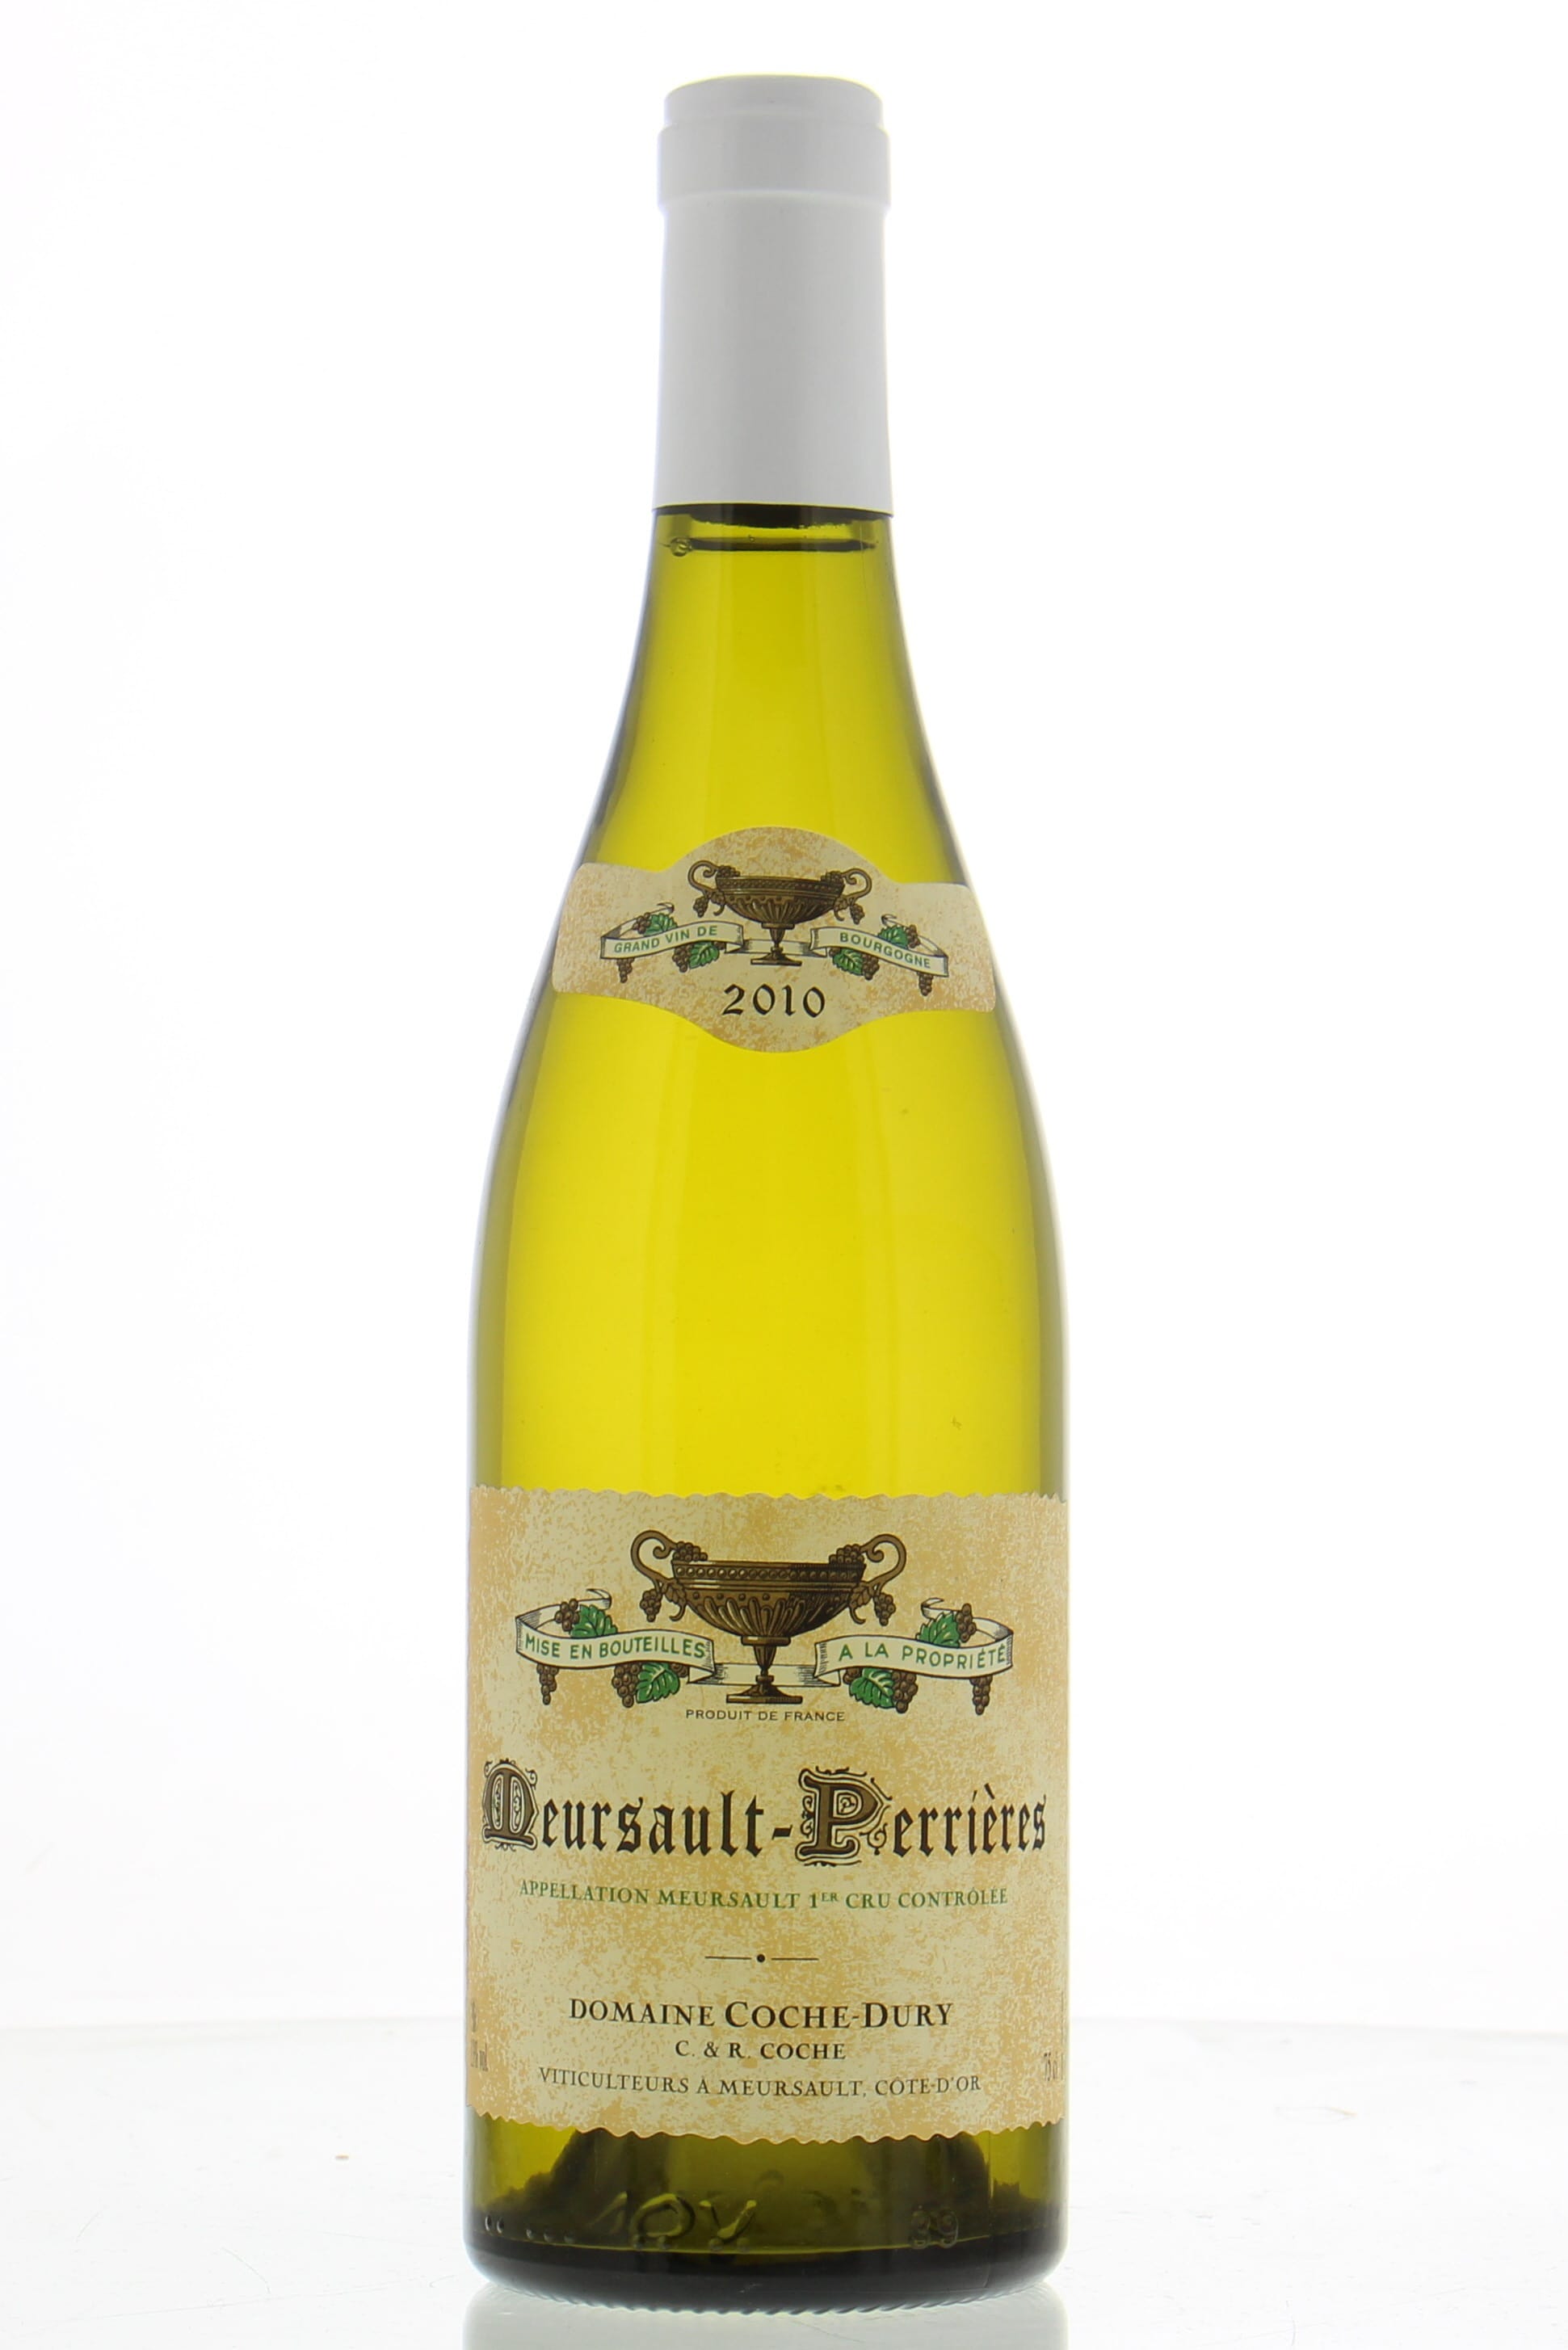 Coche Dury - Meursault Perrieres 2010 Perfect